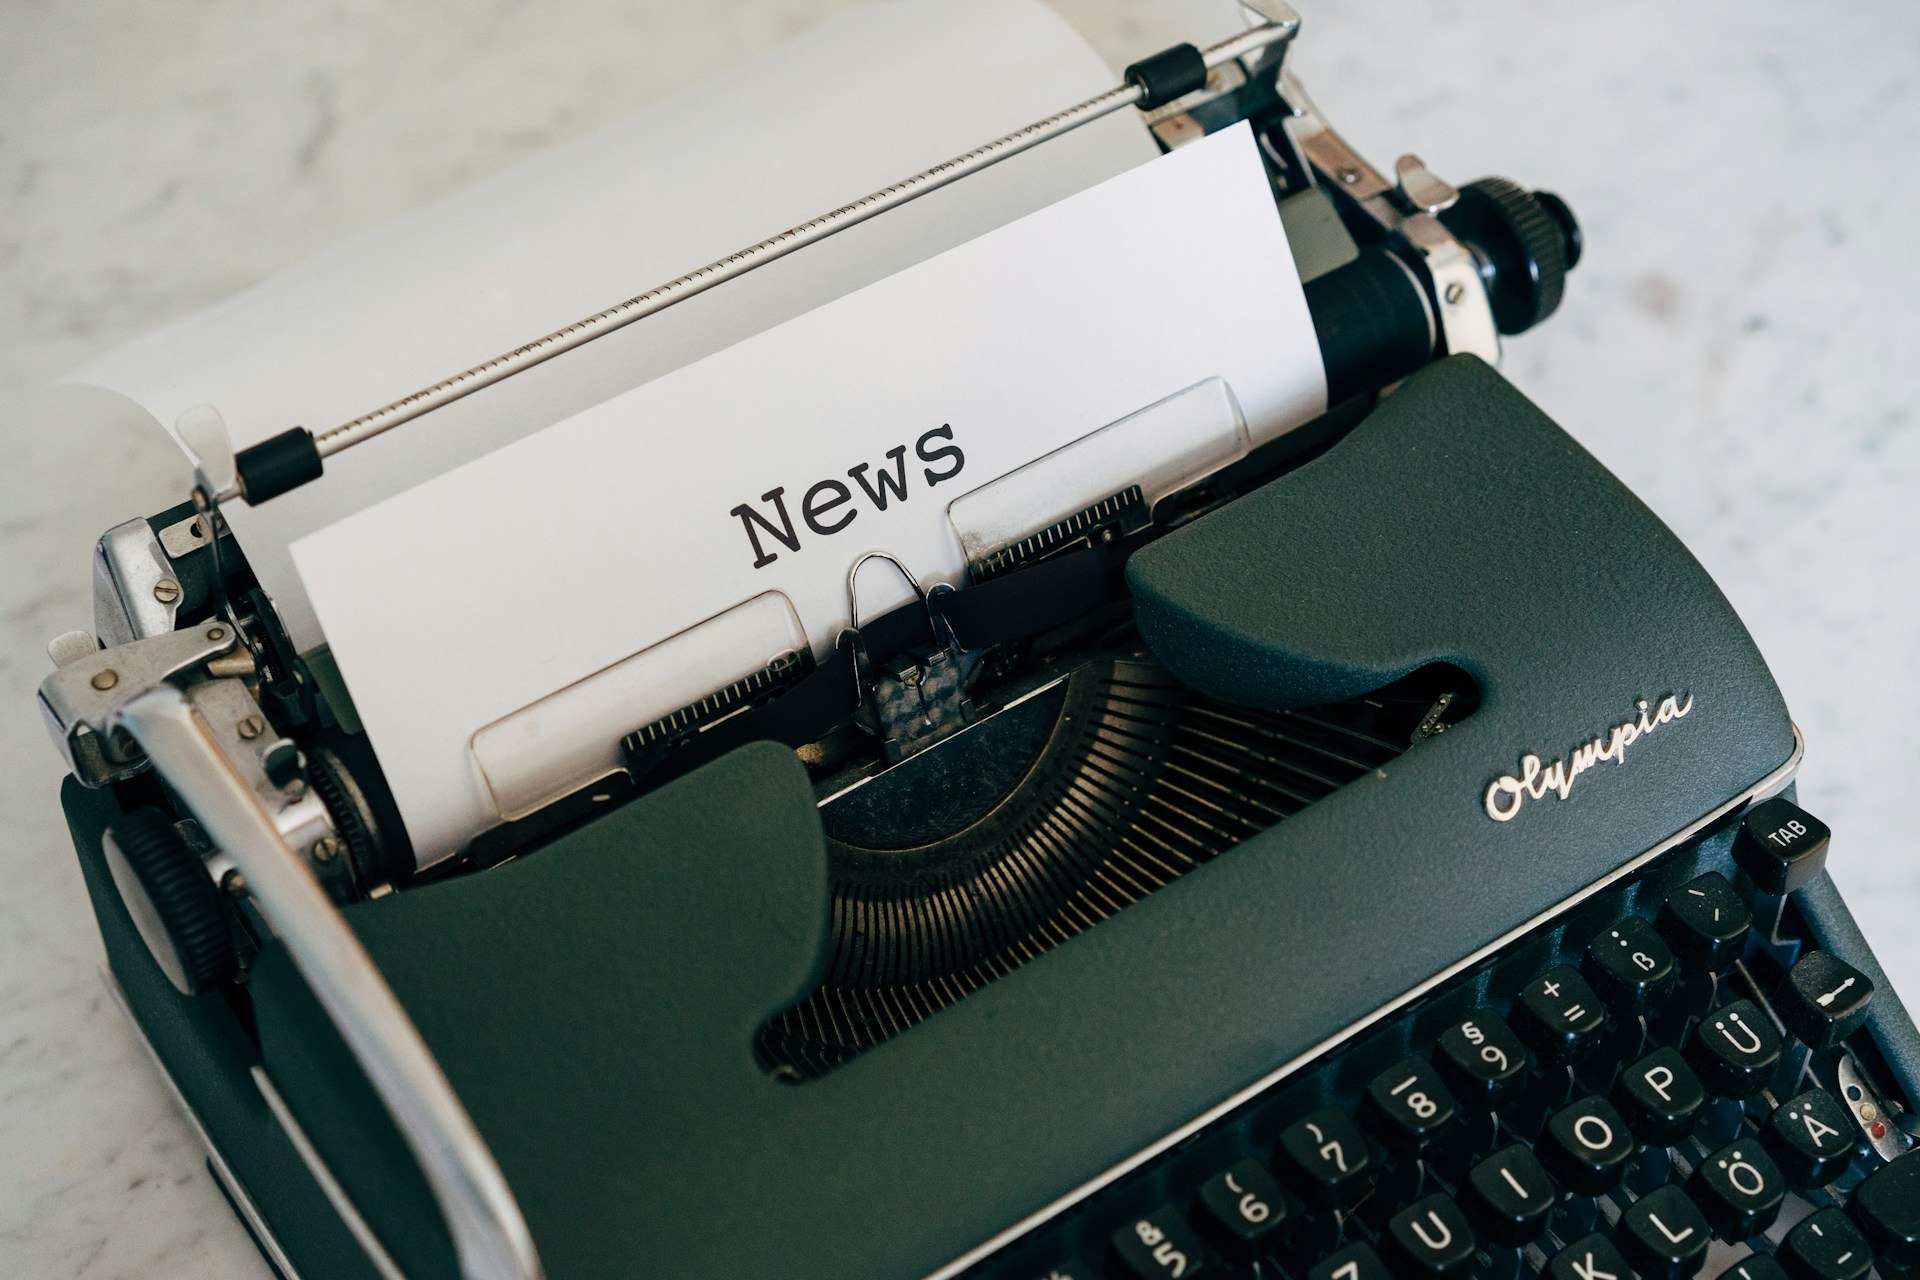 typewriter with "news" on paper